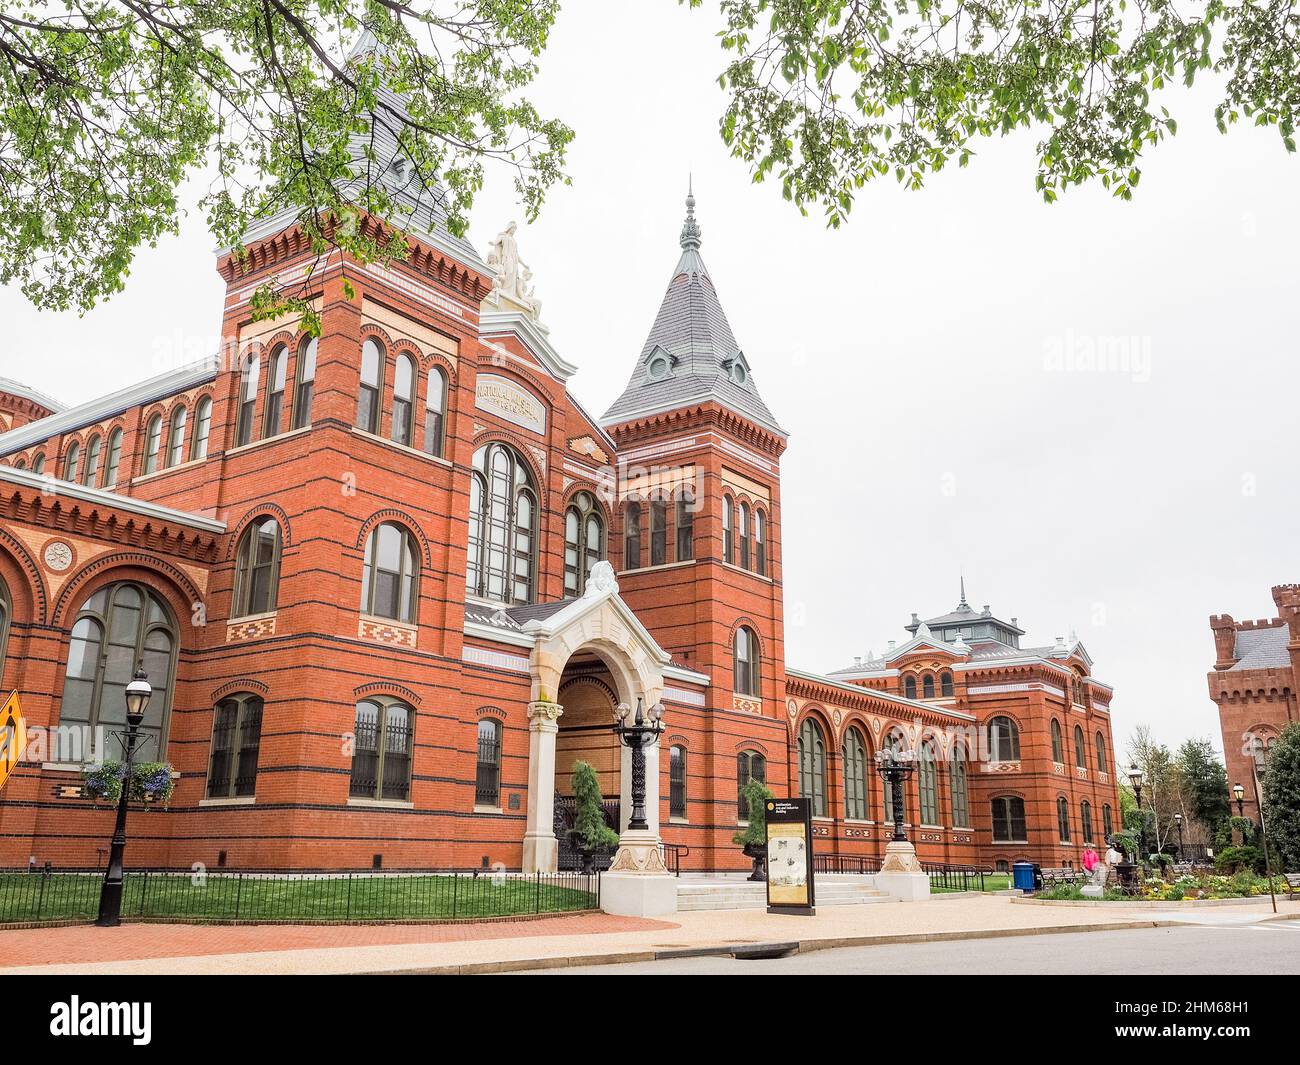 Smithsonian Institution Arts and Industries Building, Washington, DC USA Stock Photo